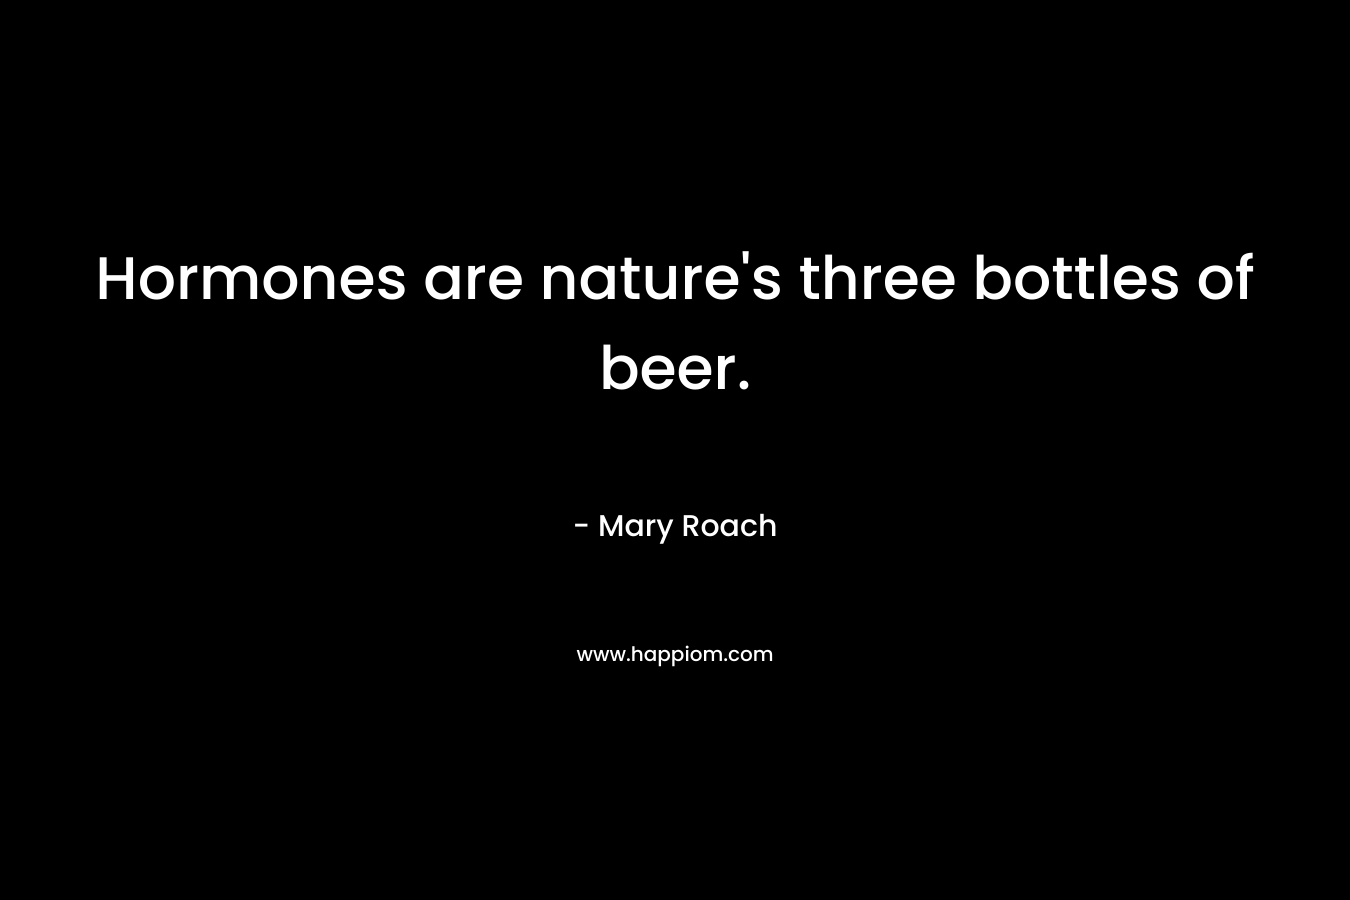 Hormones are nature’s three bottles of beer. – Mary Roach